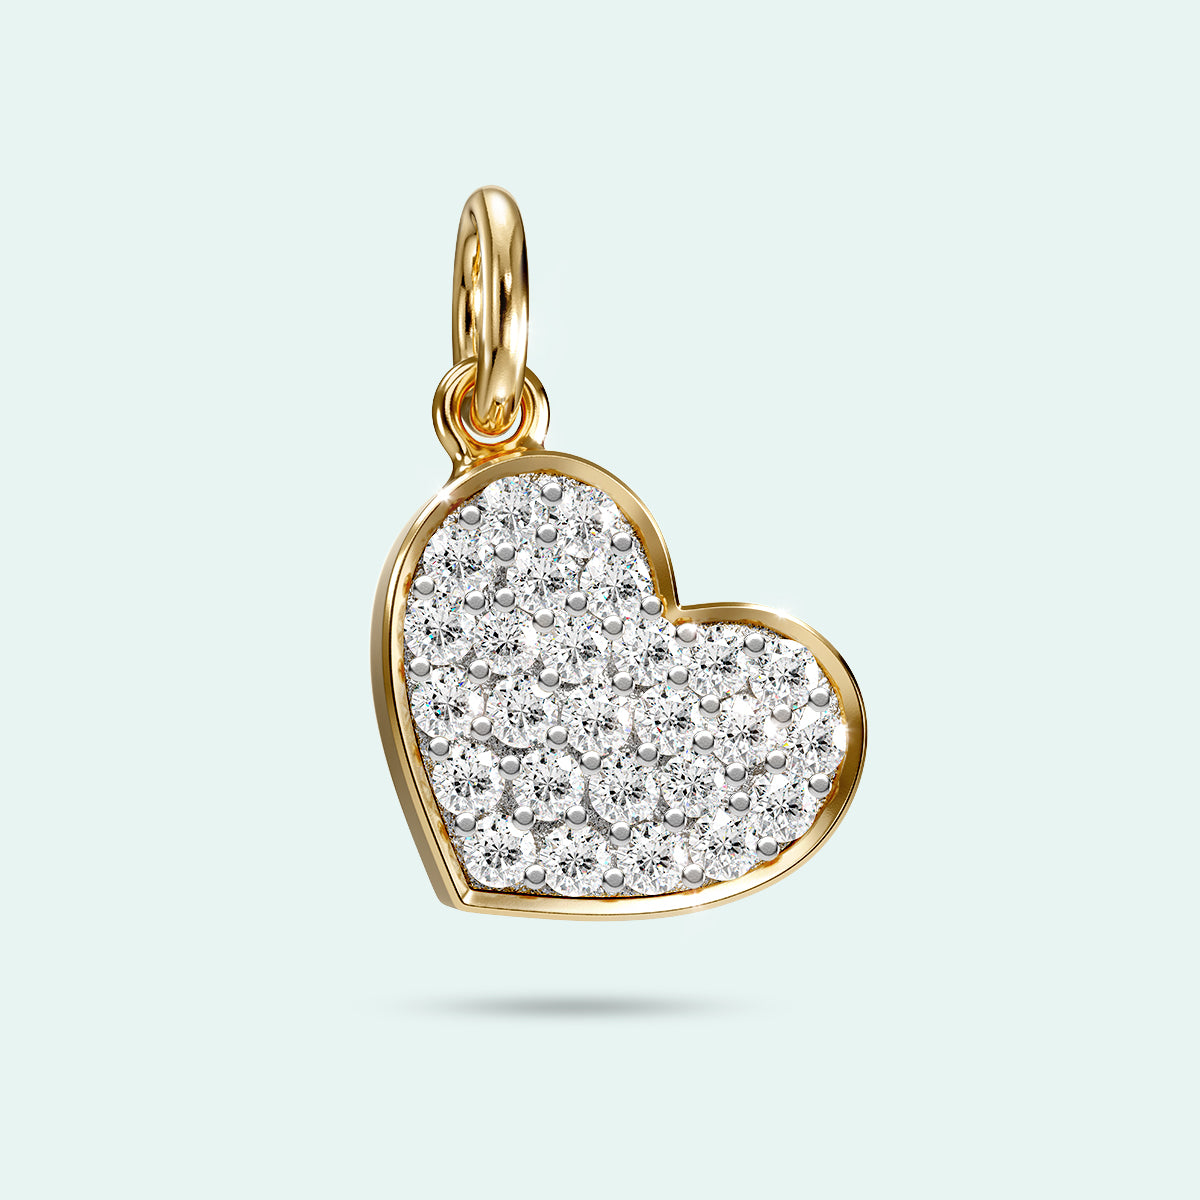 Charms - designed to hold your love note inside!